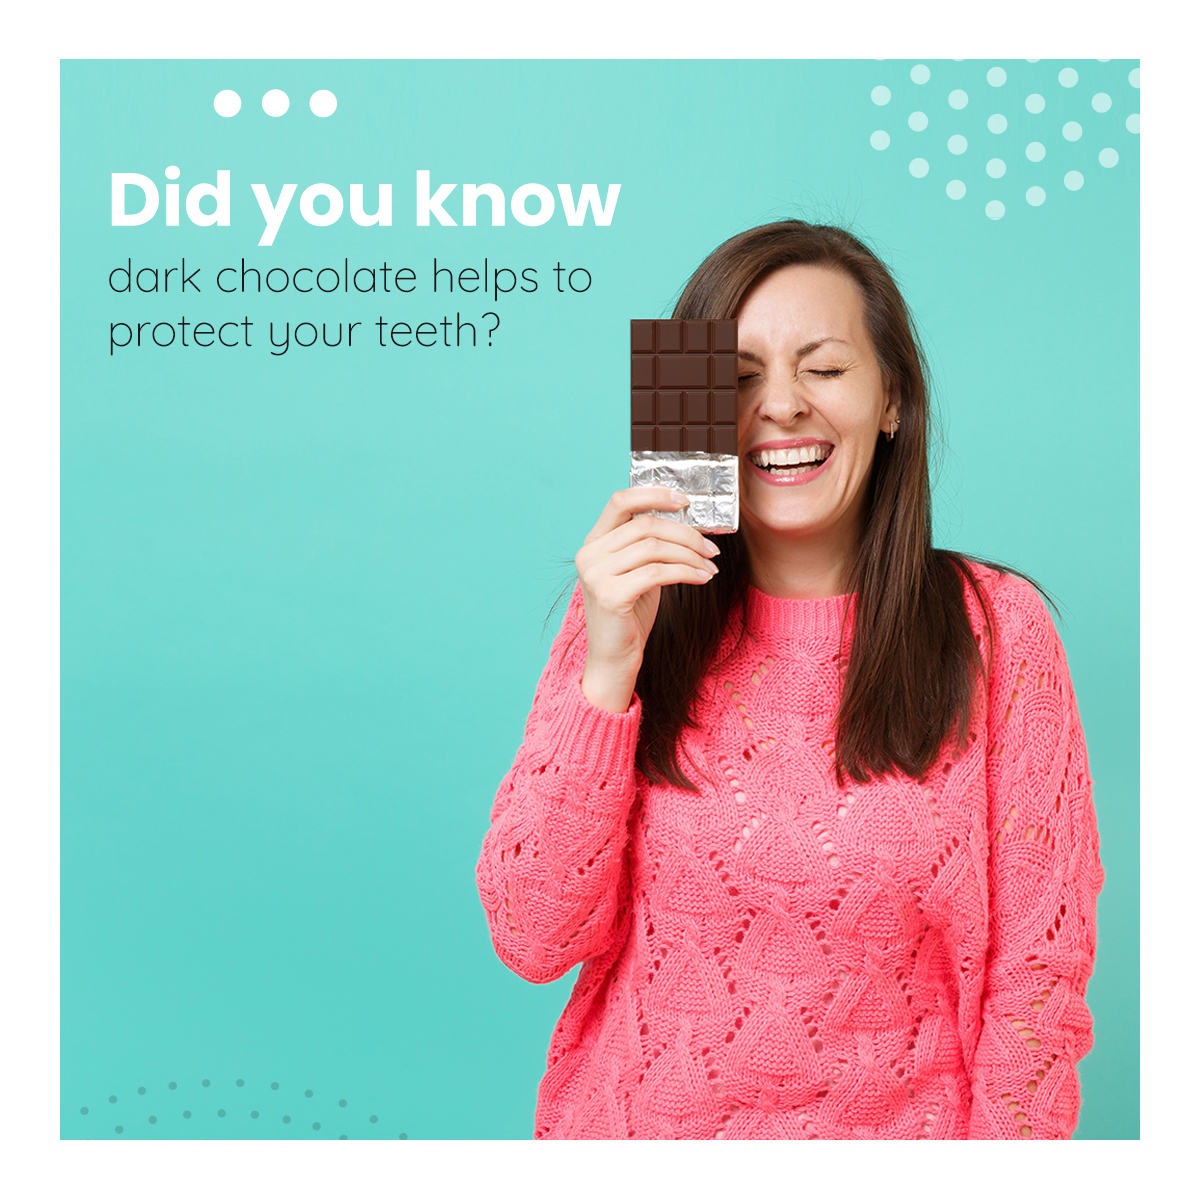 Did you know dark chocolate helps to protect your teeth?